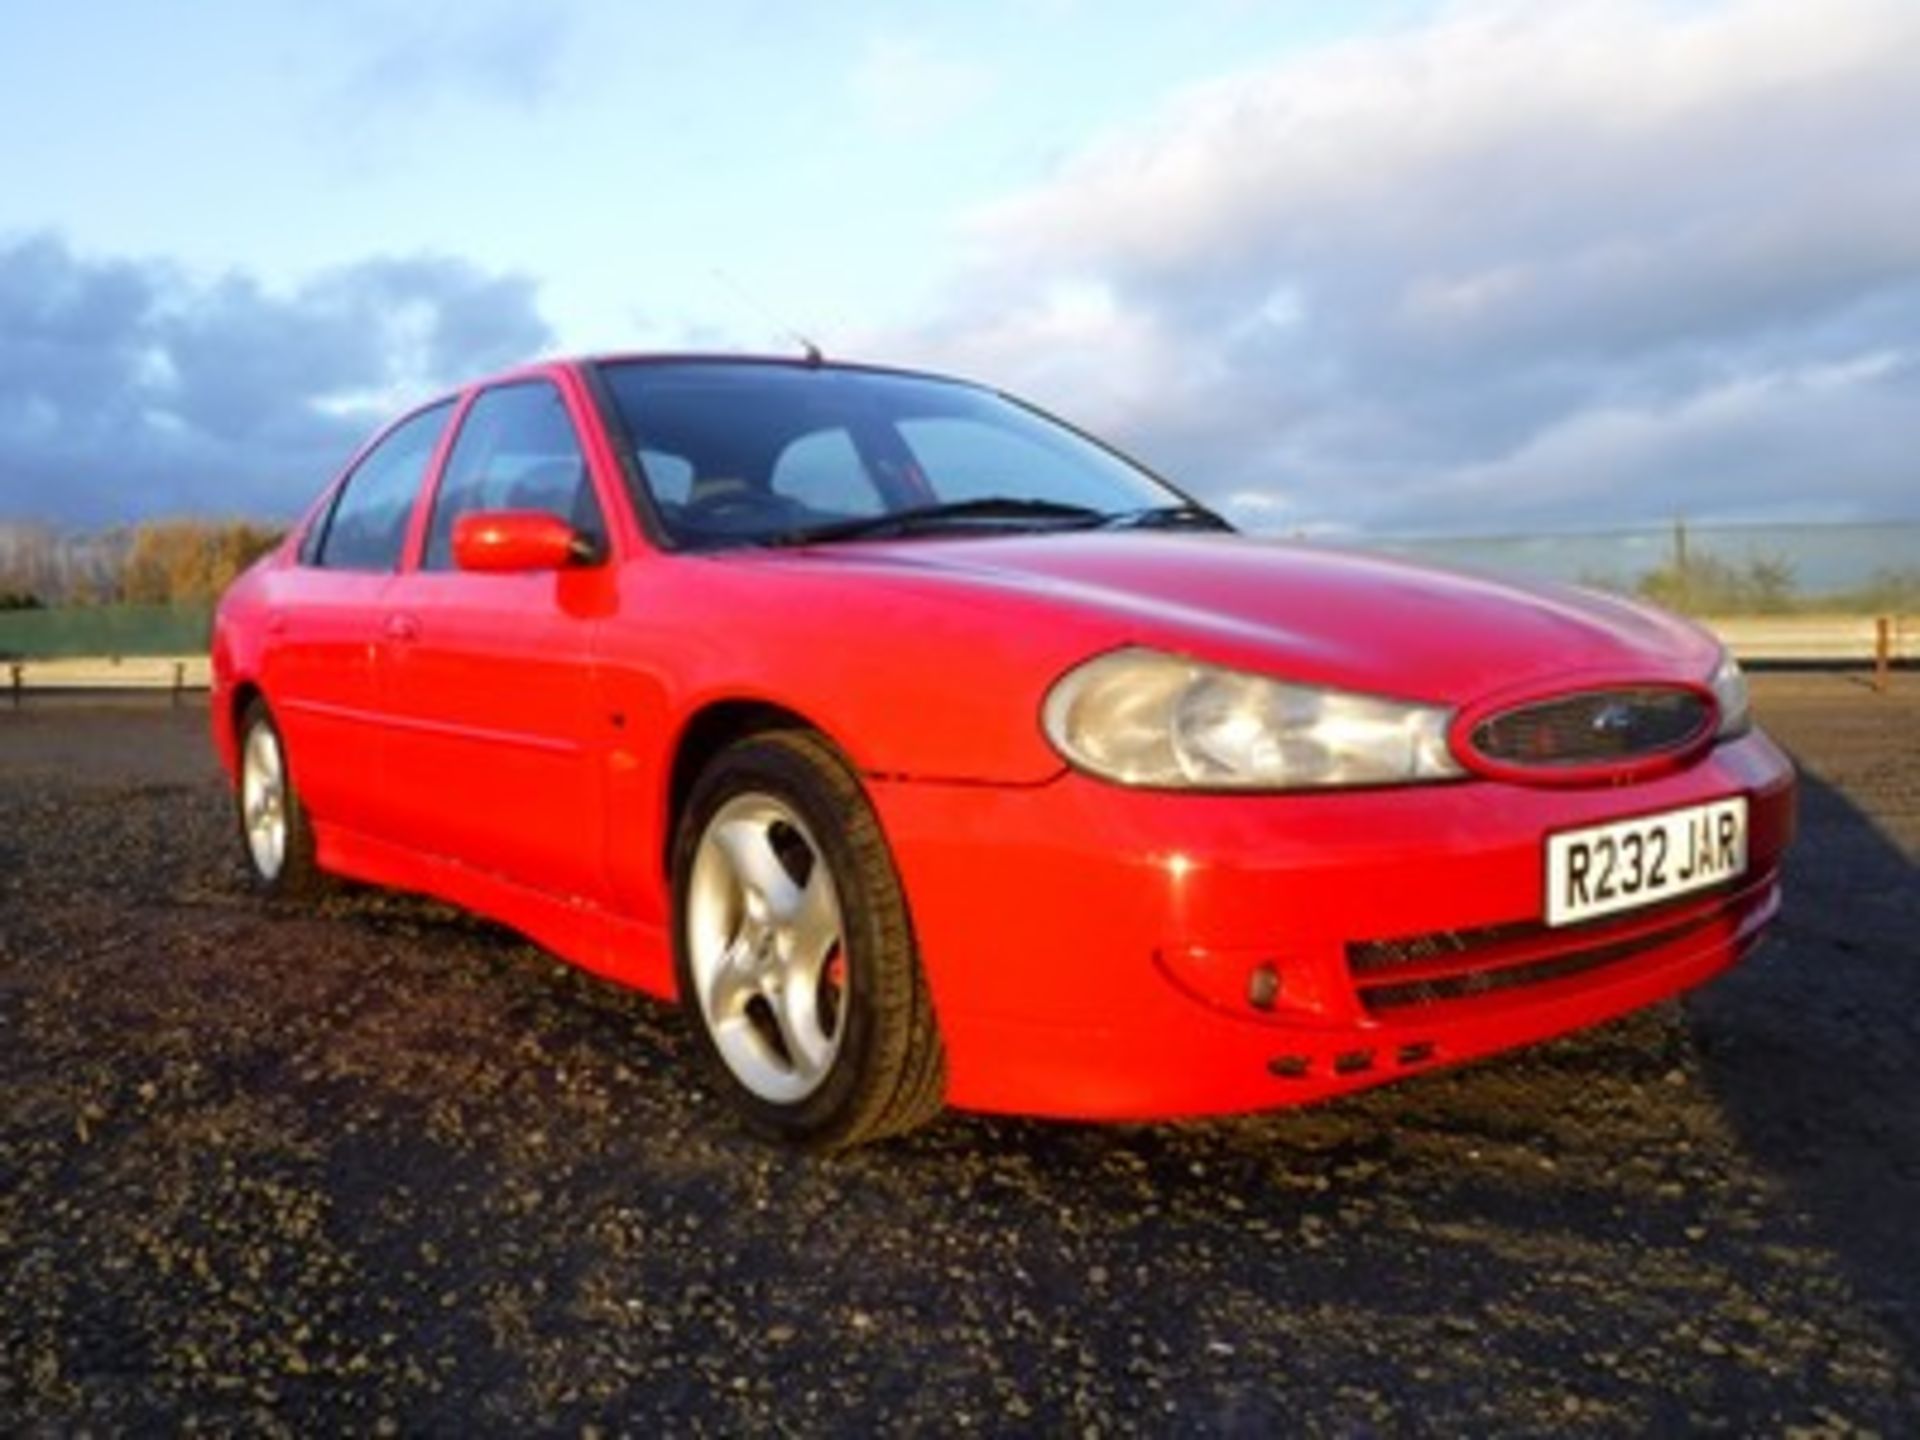 FORD MONDEO ST 24 V6 - 2497cc - Image 2 of 24